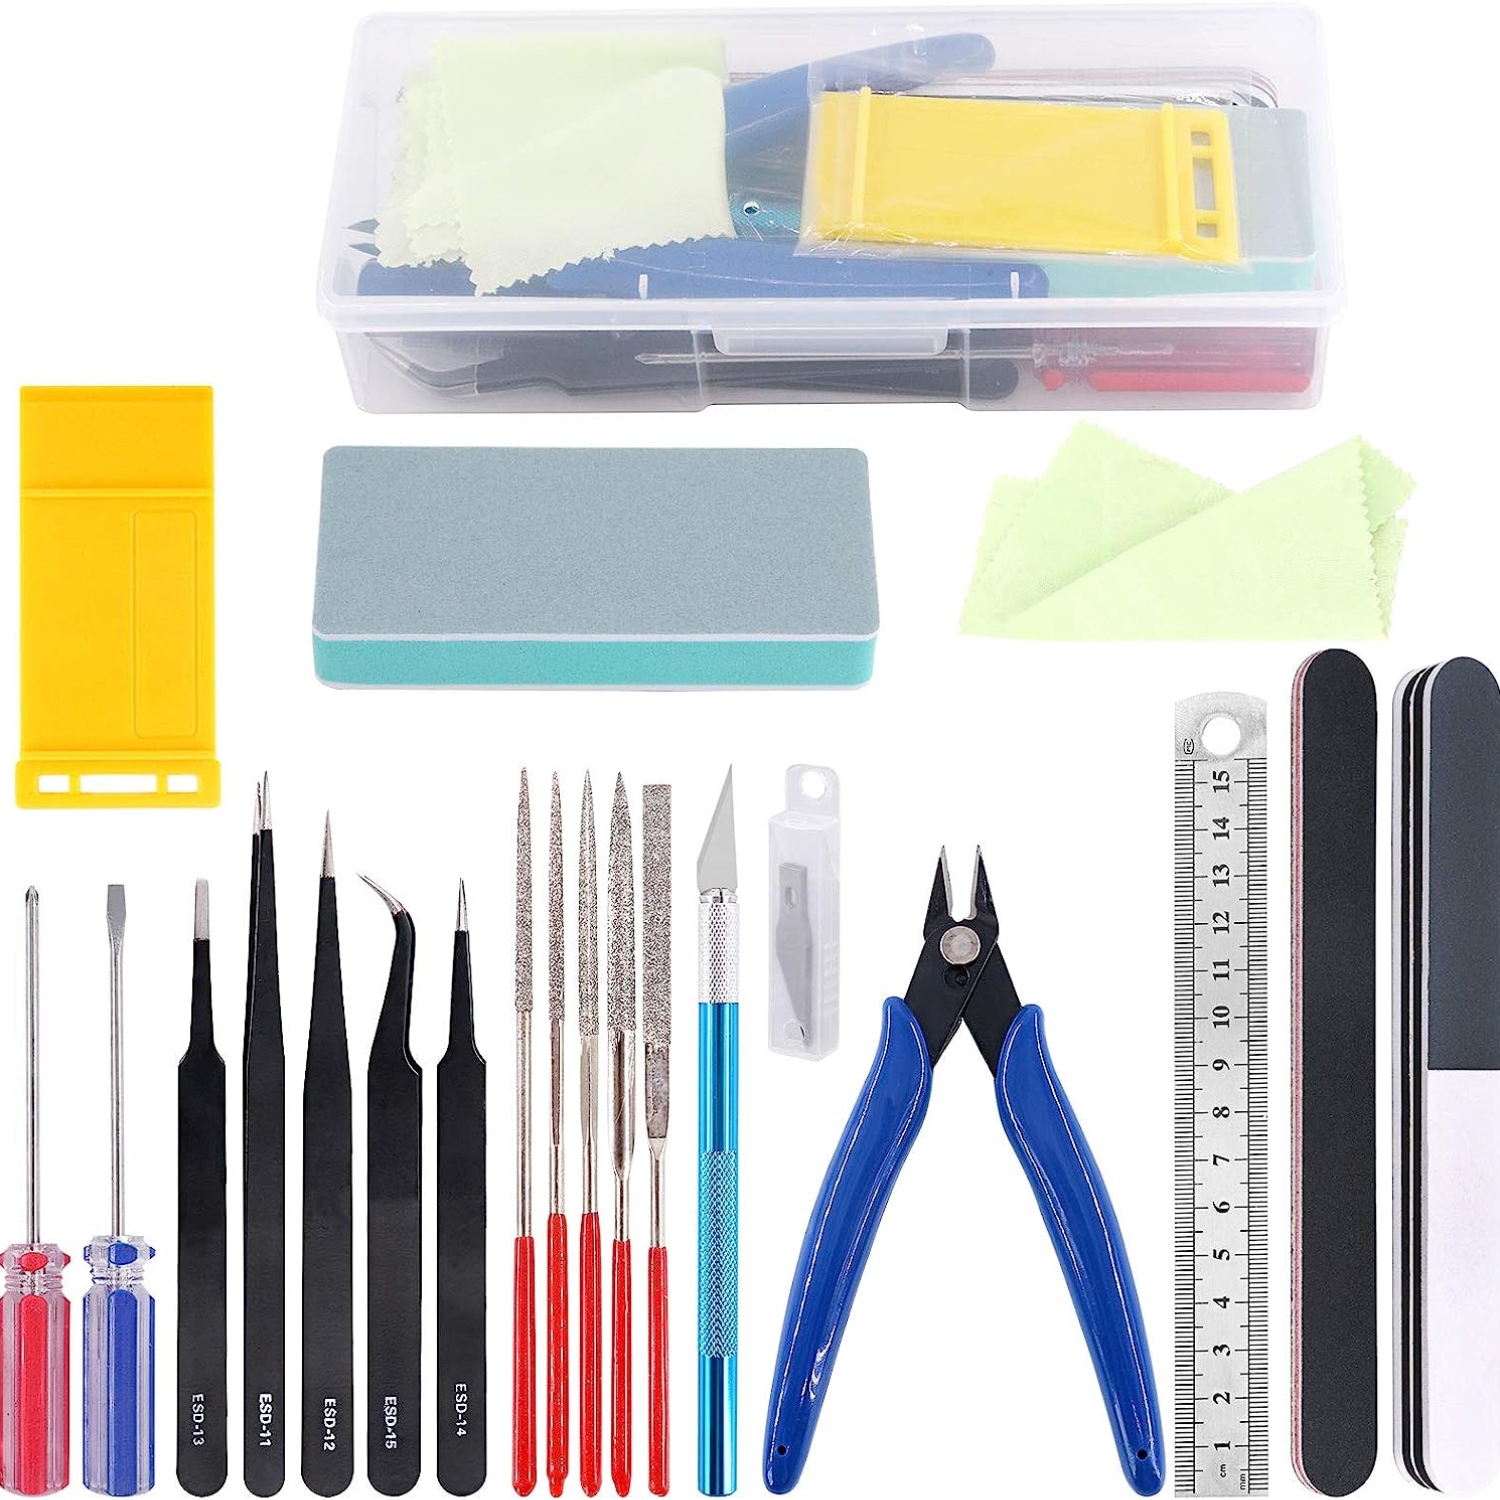 DSPIAE TC-S01 Hobby Model Craft Tool COMBO SET Model building tools  Professional Grade Kit For DIY Making of assembled models